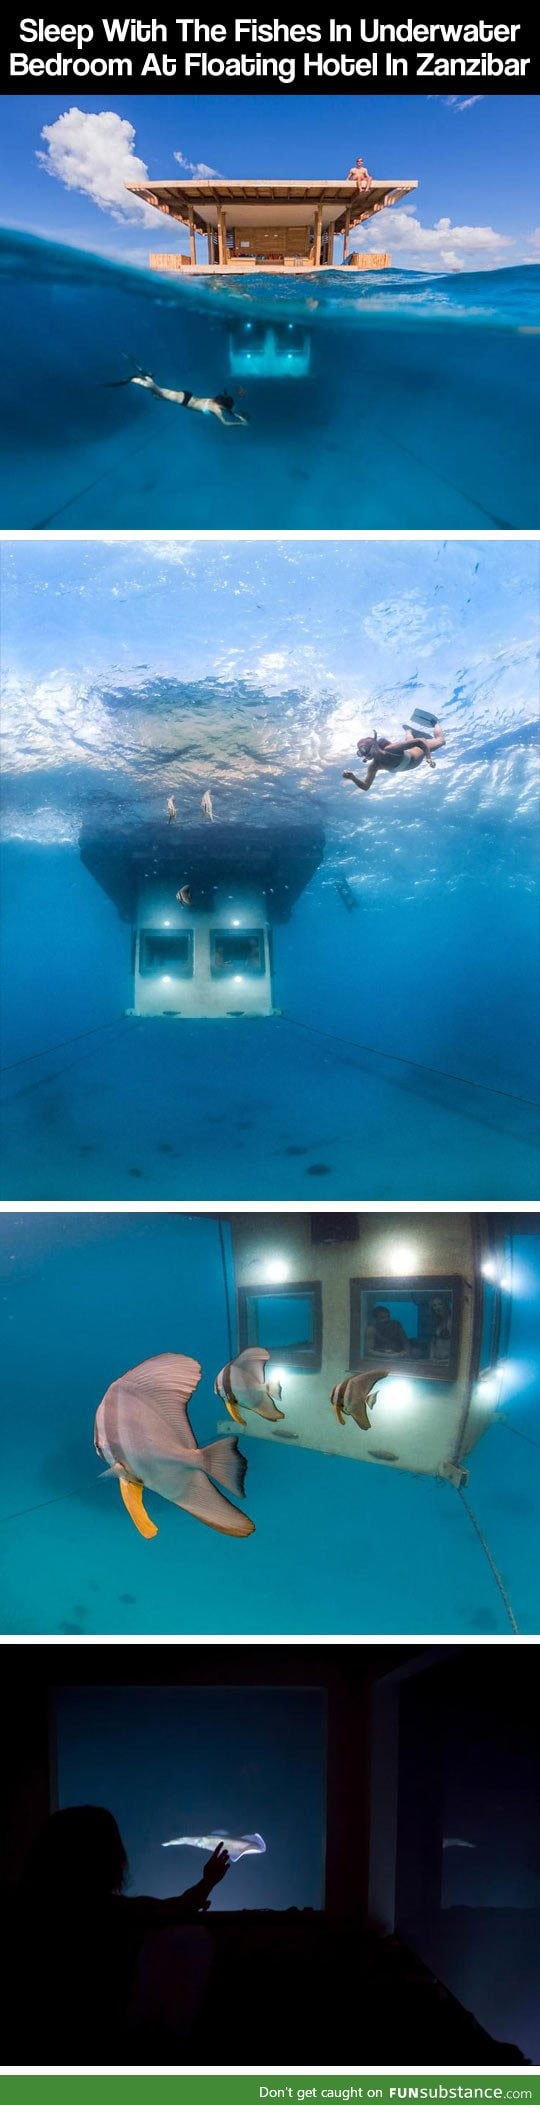 Awesome underwater bedroom